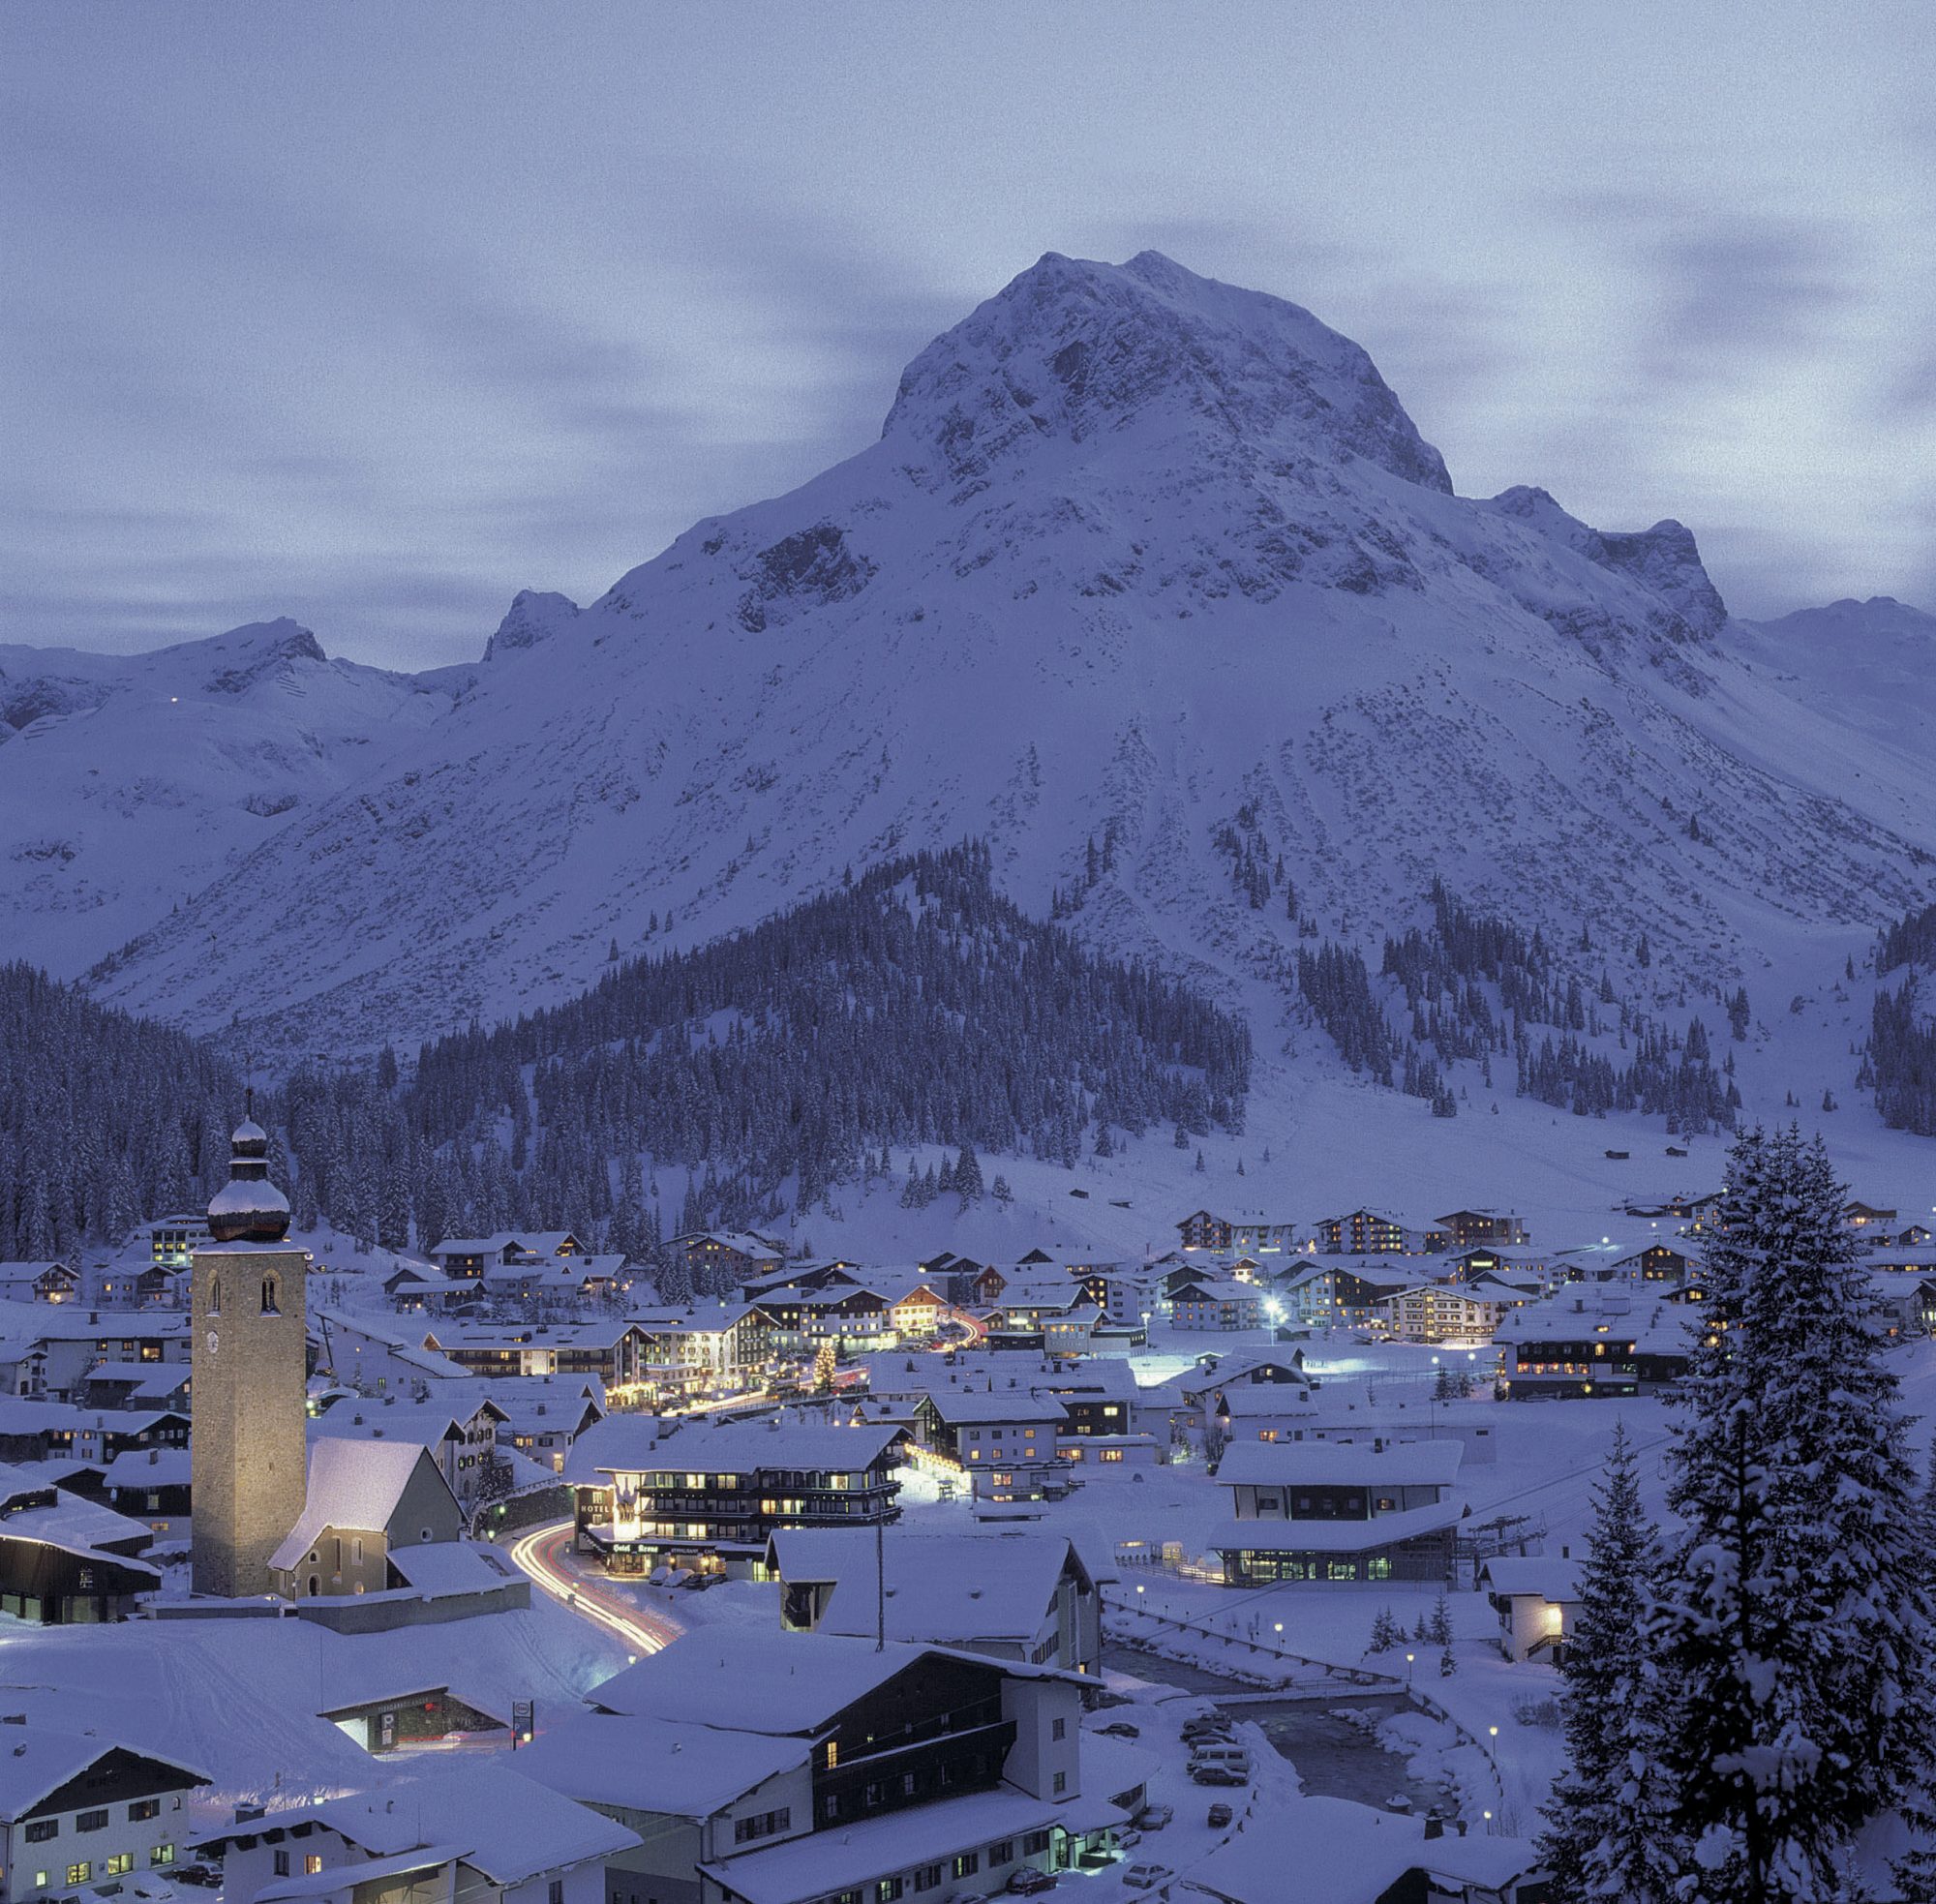 The Omeshorn towering the picture perfect town of Lech - Lech Zürs am Arlberg by night by Felder- Lech Zürs Tourismus. Must-Read Guide to Lech.